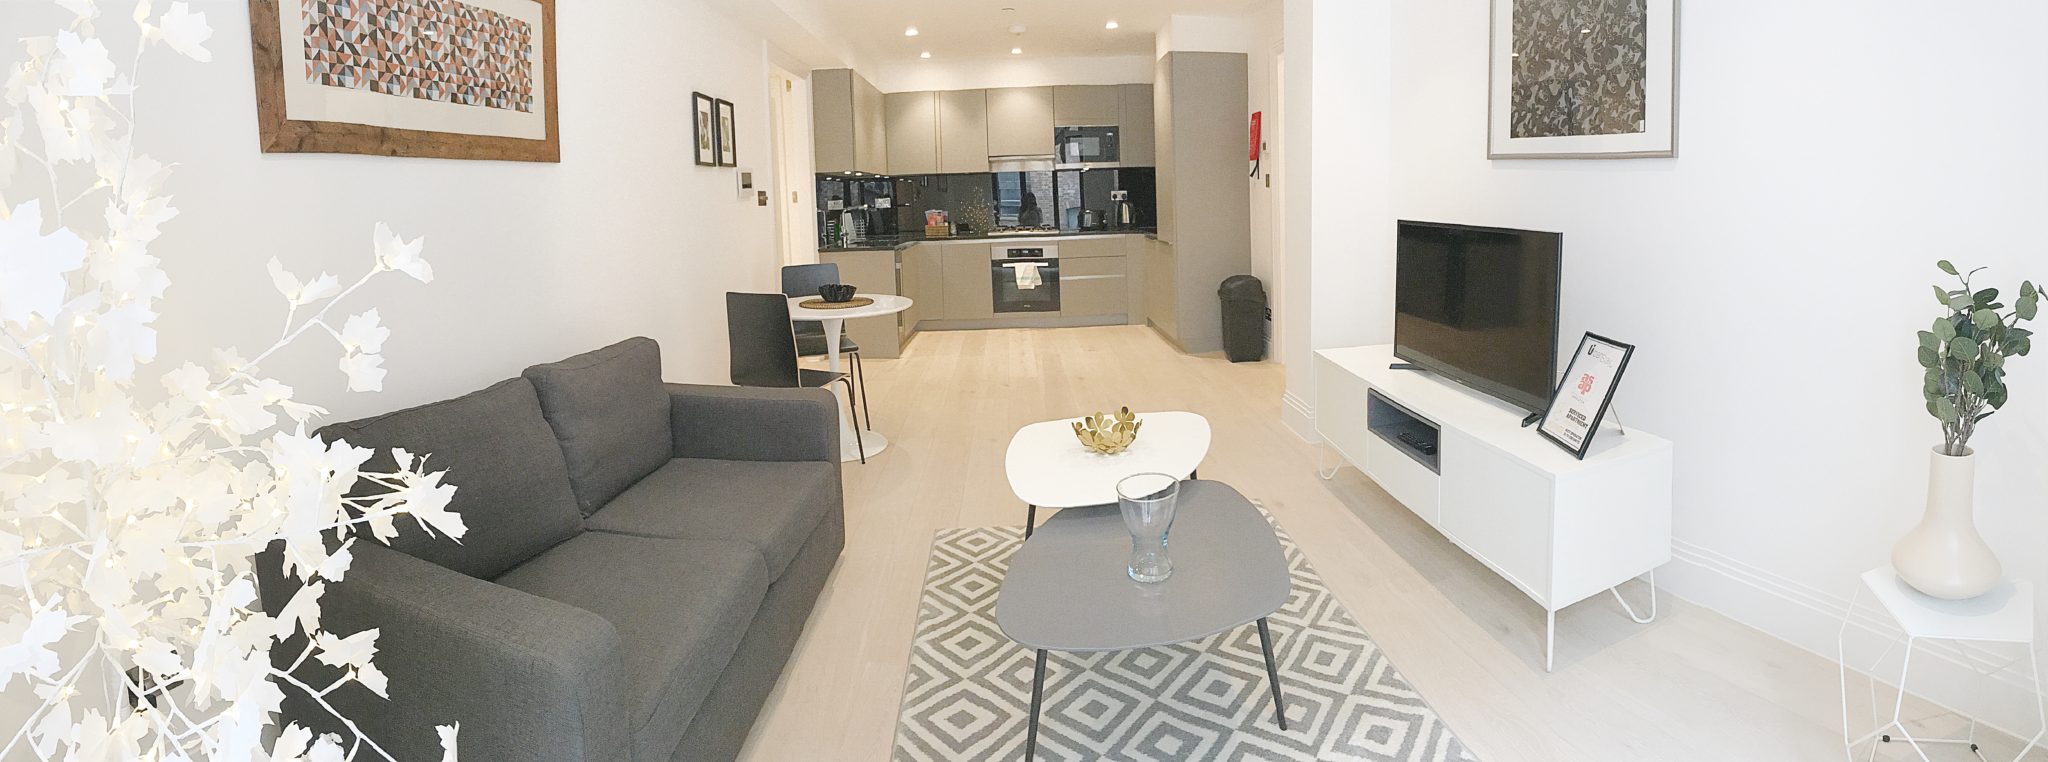 Oxford-Circus-Serviced-Apartments-London-–-Luxury-Corporate-&-Holiday-Accommodation-Oxford-Street,-Central-London-|-Urban-Stay